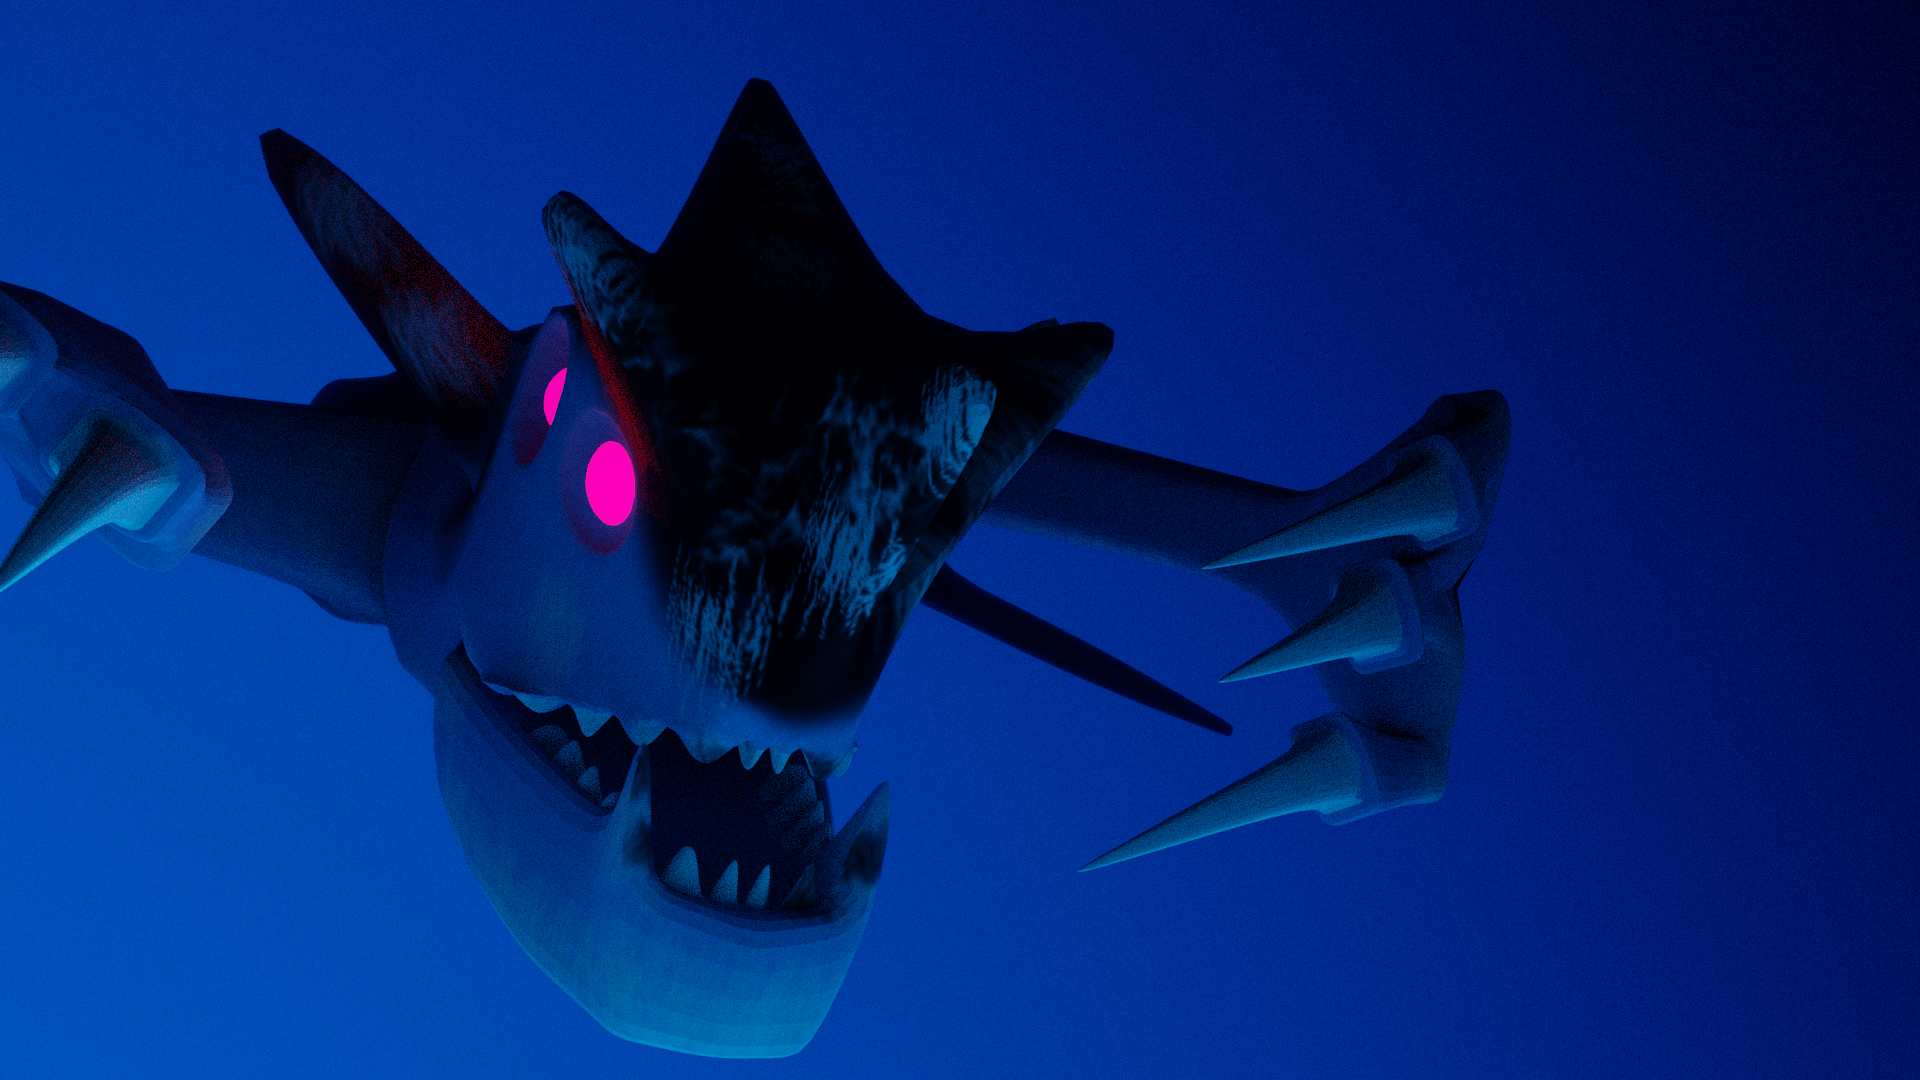 I tried to model a reaper leviathan